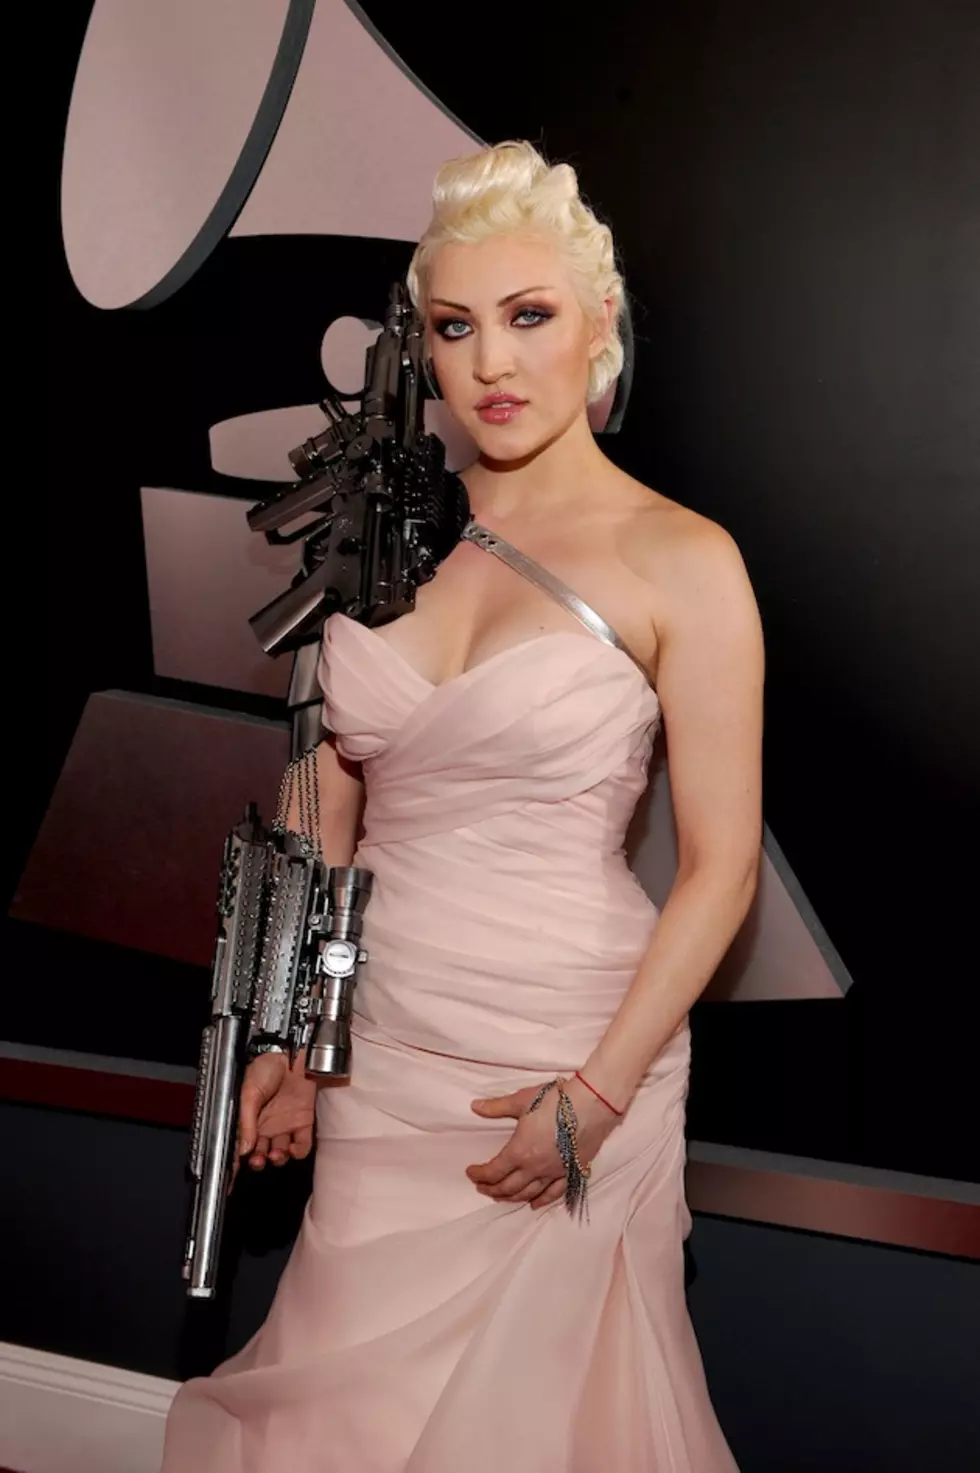 Sasha Gradiva&#8217;s 2012 Grammy Awards Outfit Possibly Inspired by Robocop